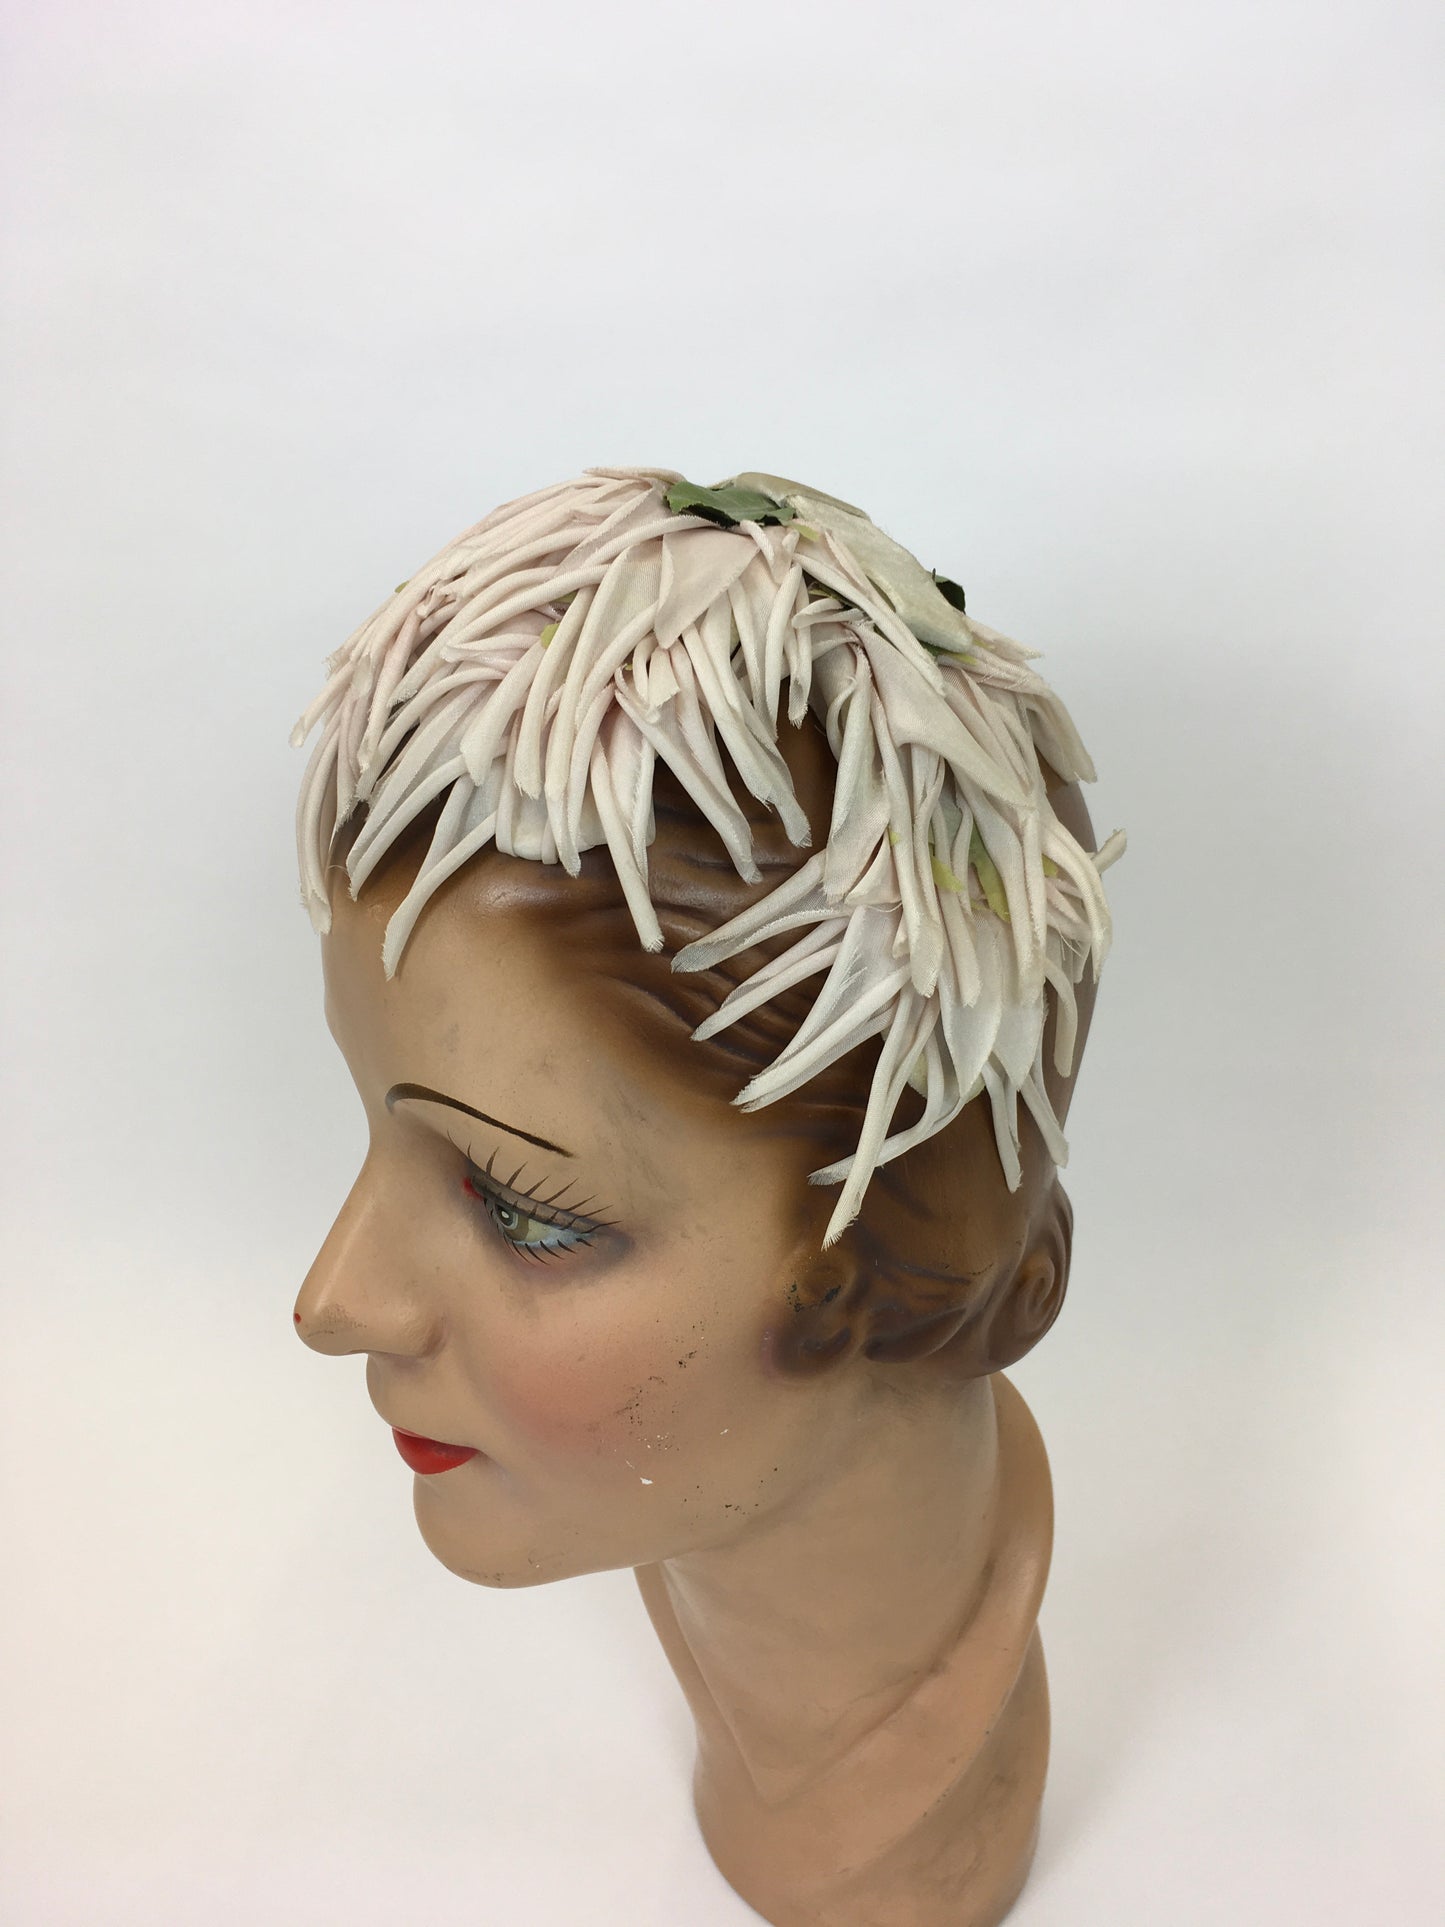 Original 1950s Velvet and Floral Headpiece - In a Delicate Pallet of Soft Pinks, Pale Ivory and Green